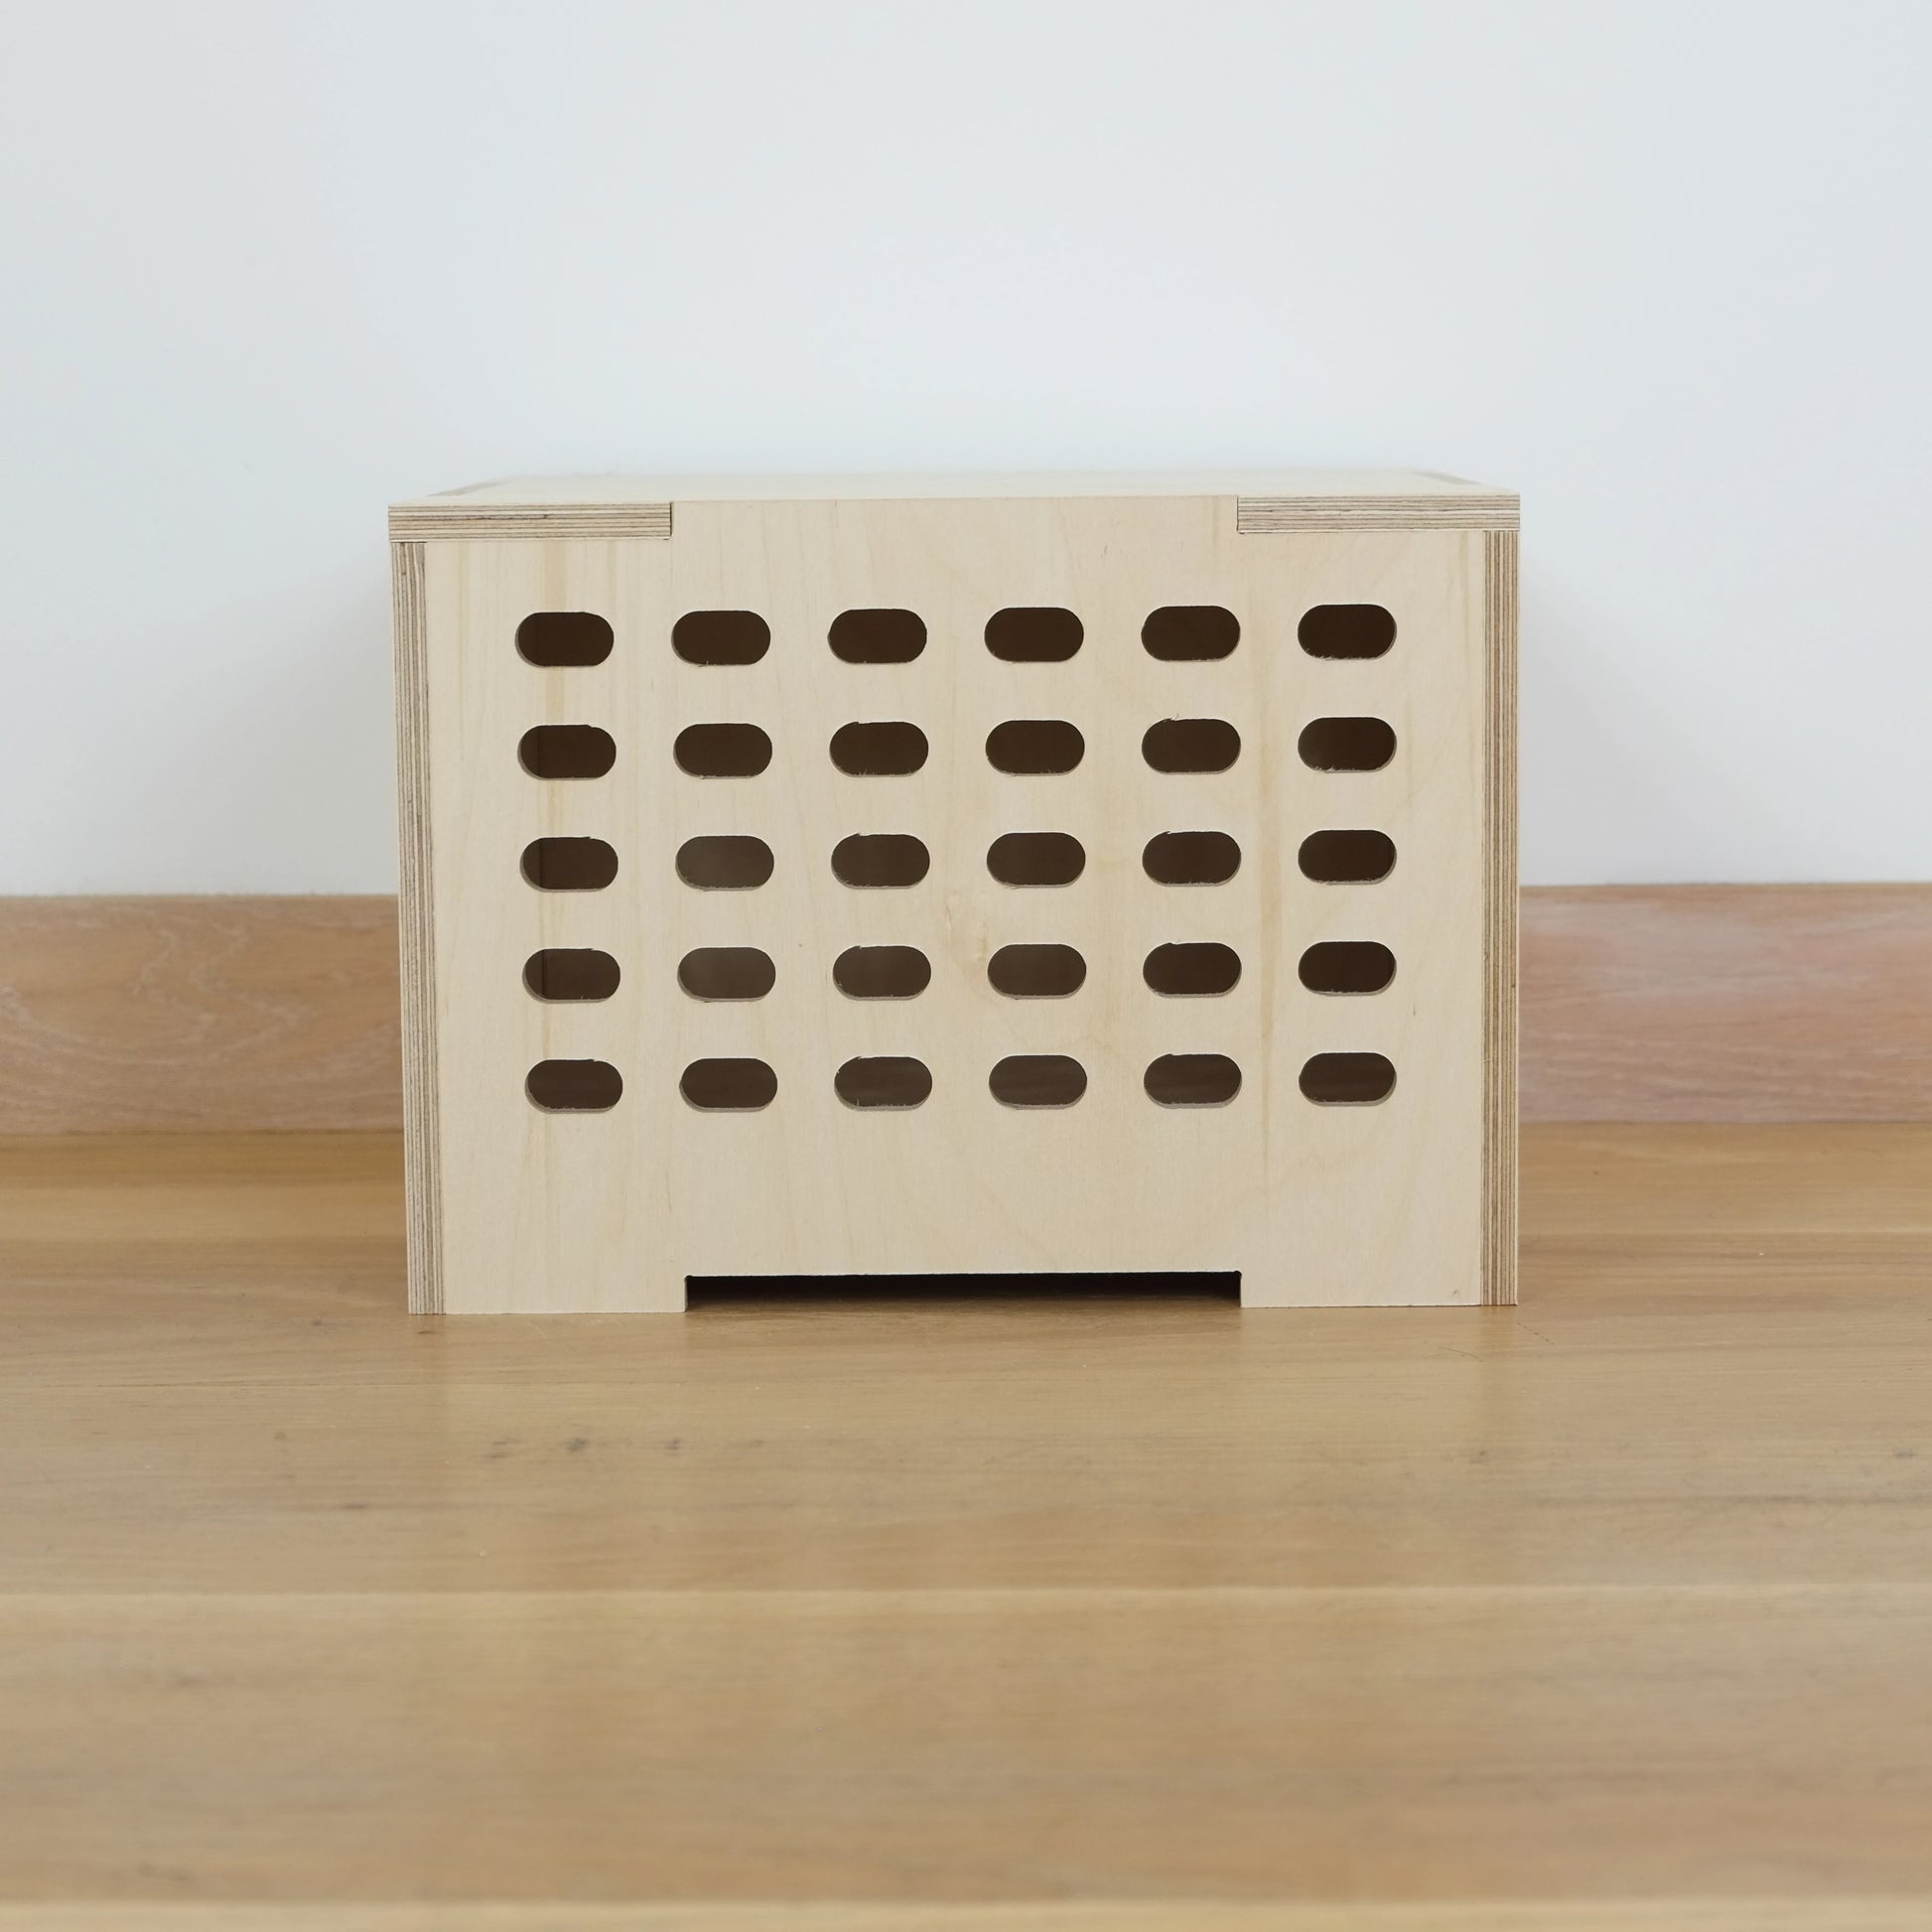 Birch plywood wooden crate with 5 rows of lozenge shape cutouts running vertically & wooden lid against a white wall